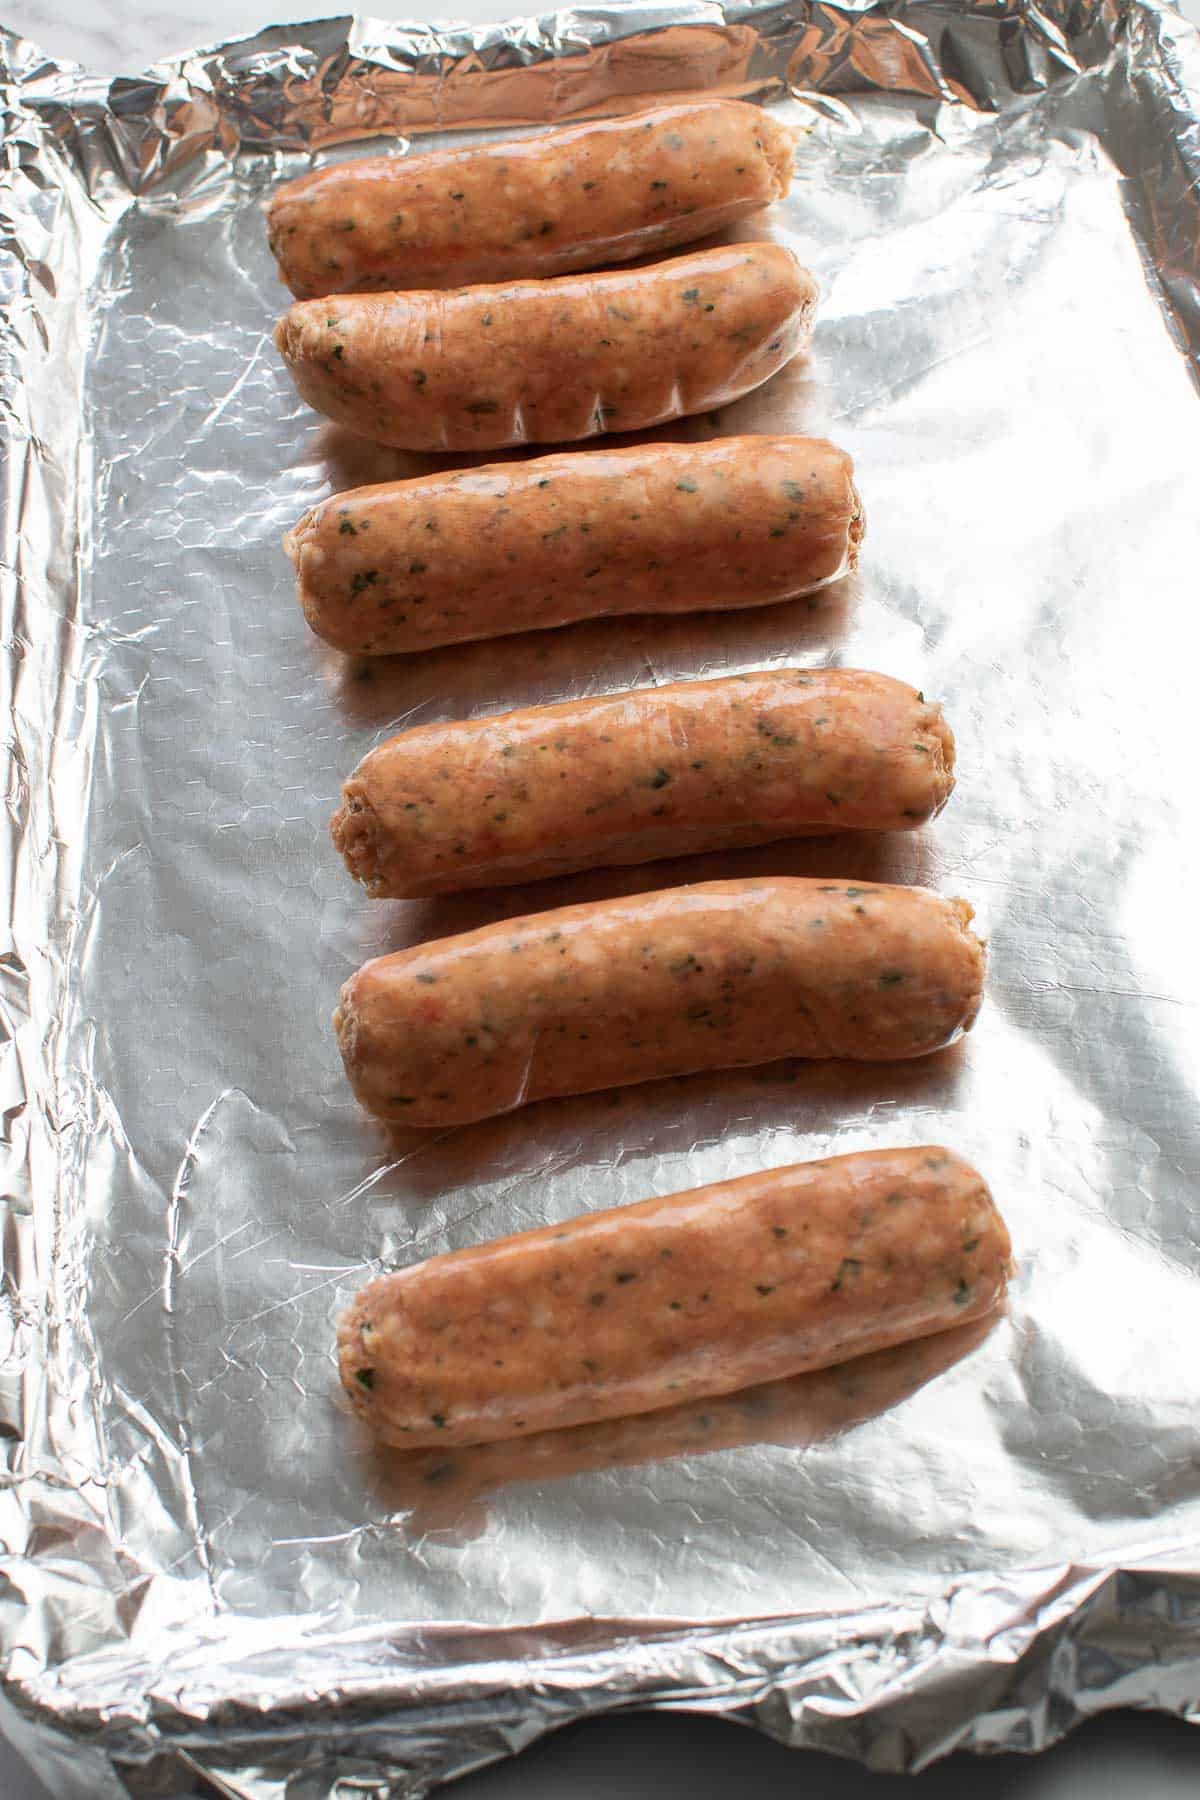 Uncooked italian sausages,